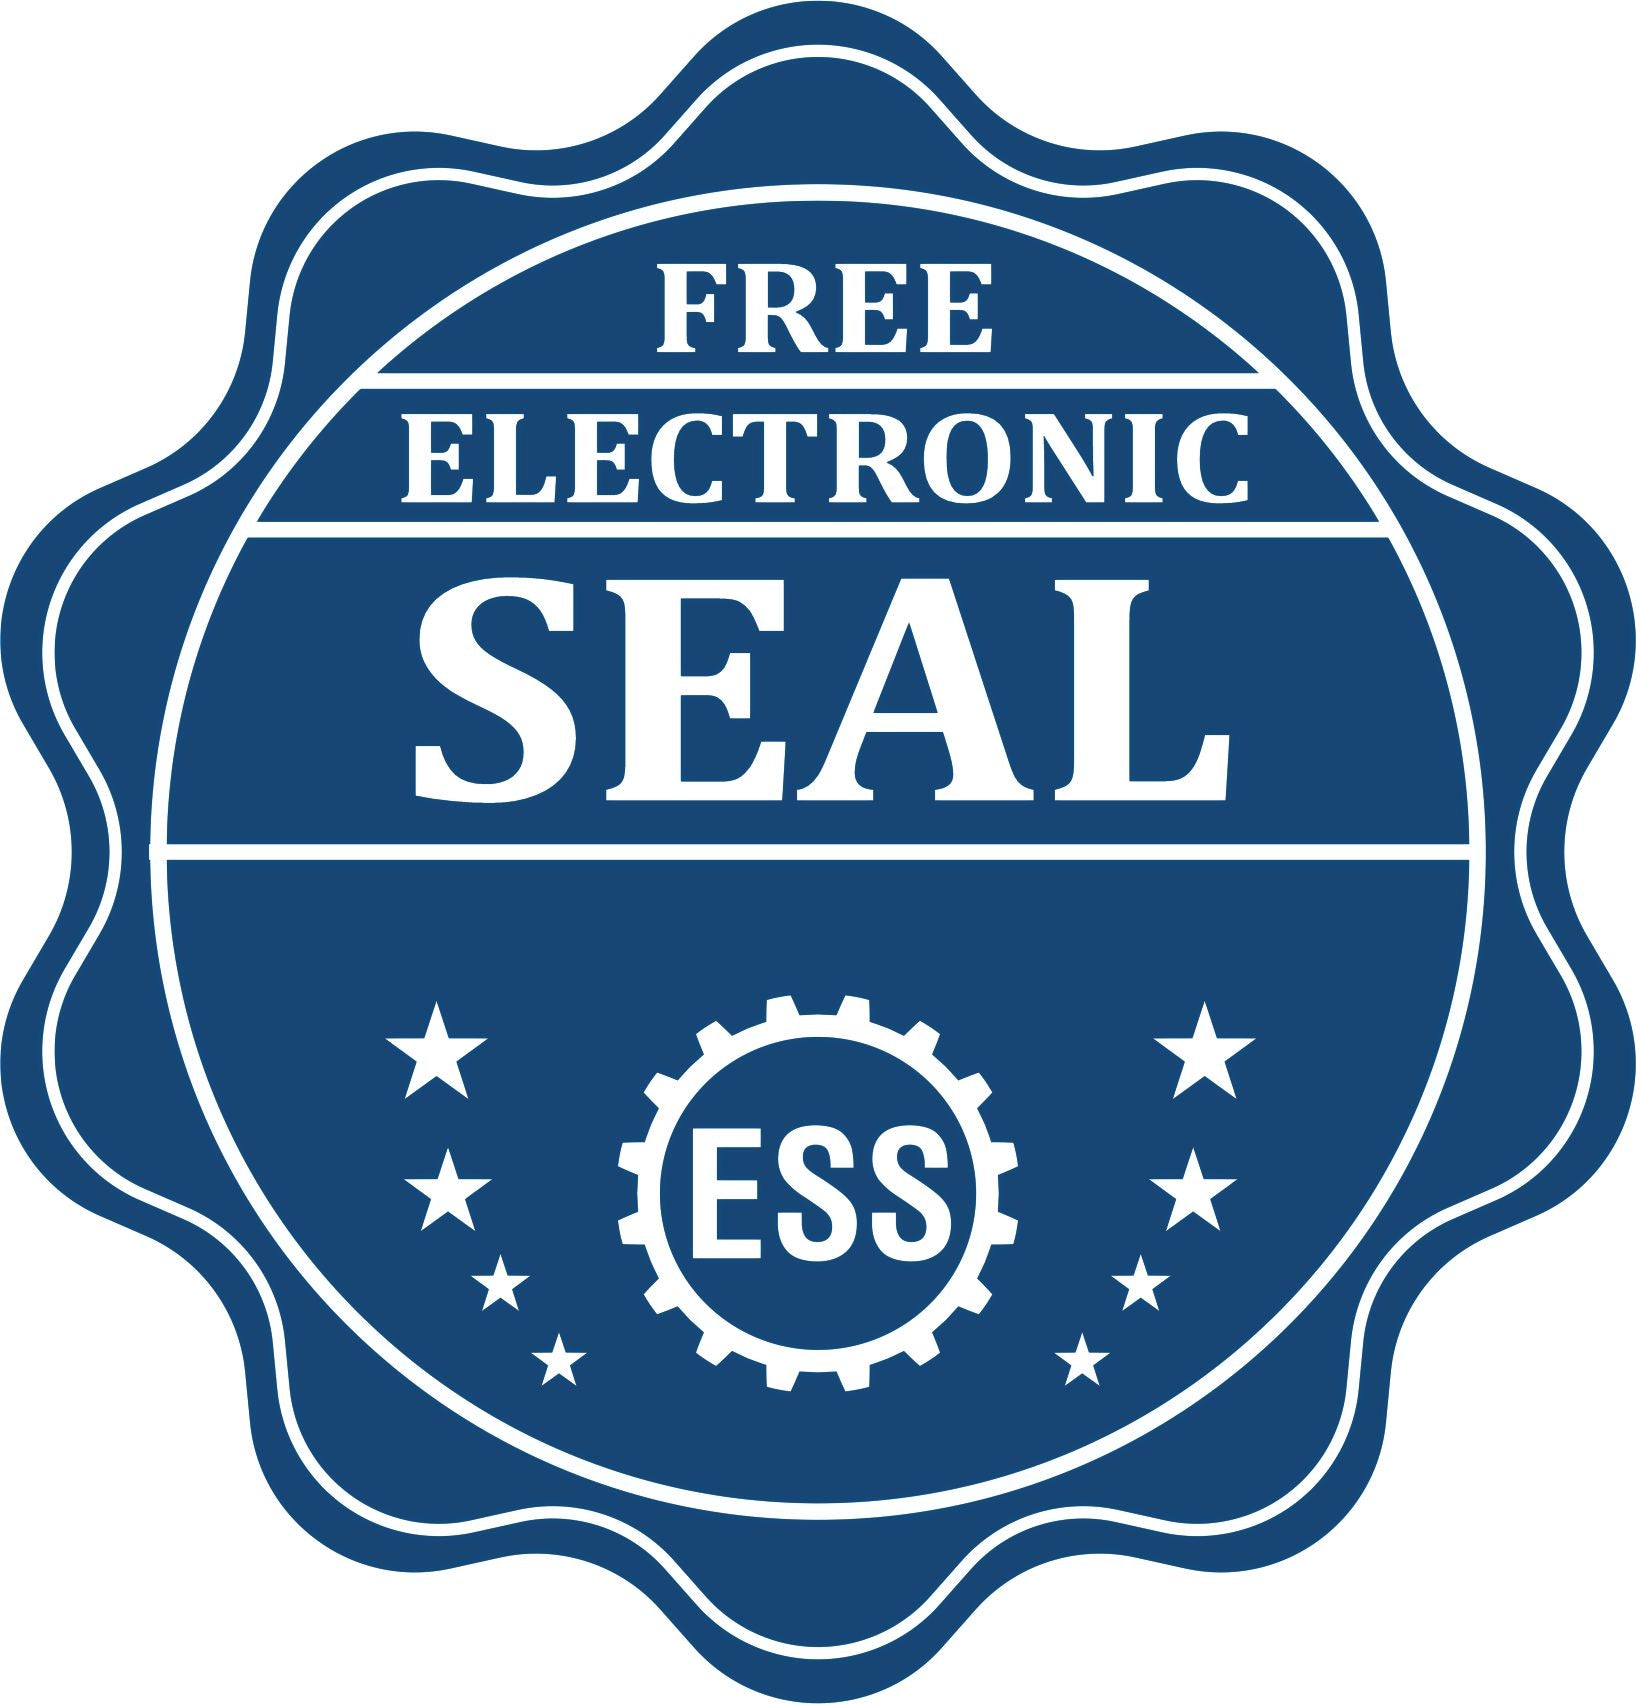 A badge showing a free electronic seal for the State of Nevada Extended Long Reach Engineer Seal with stars and the ESS gear on the emblem.